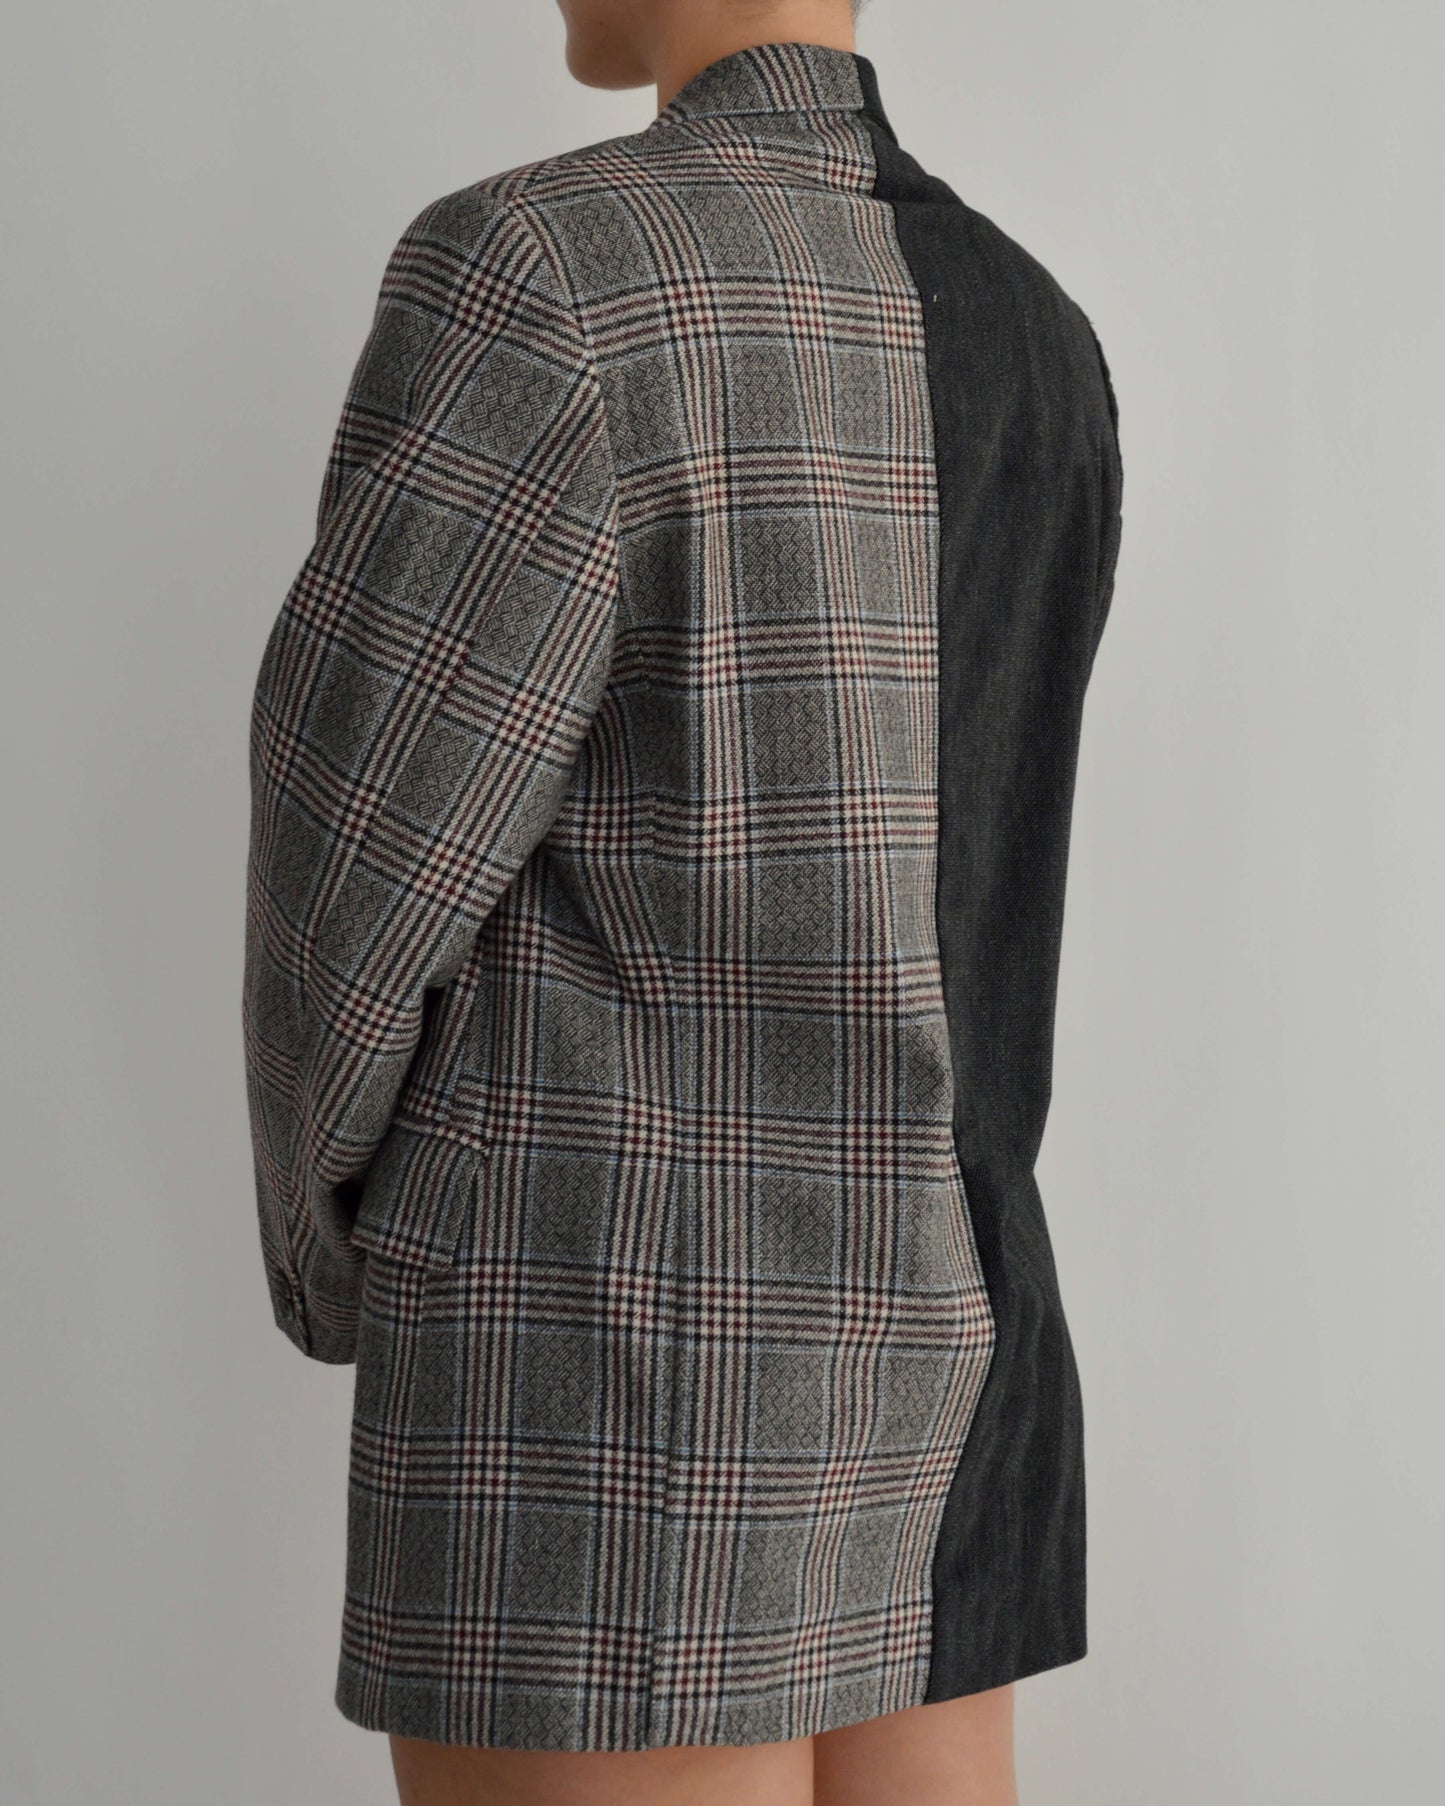 DUO Blazer - Soft and Checked (S/L)